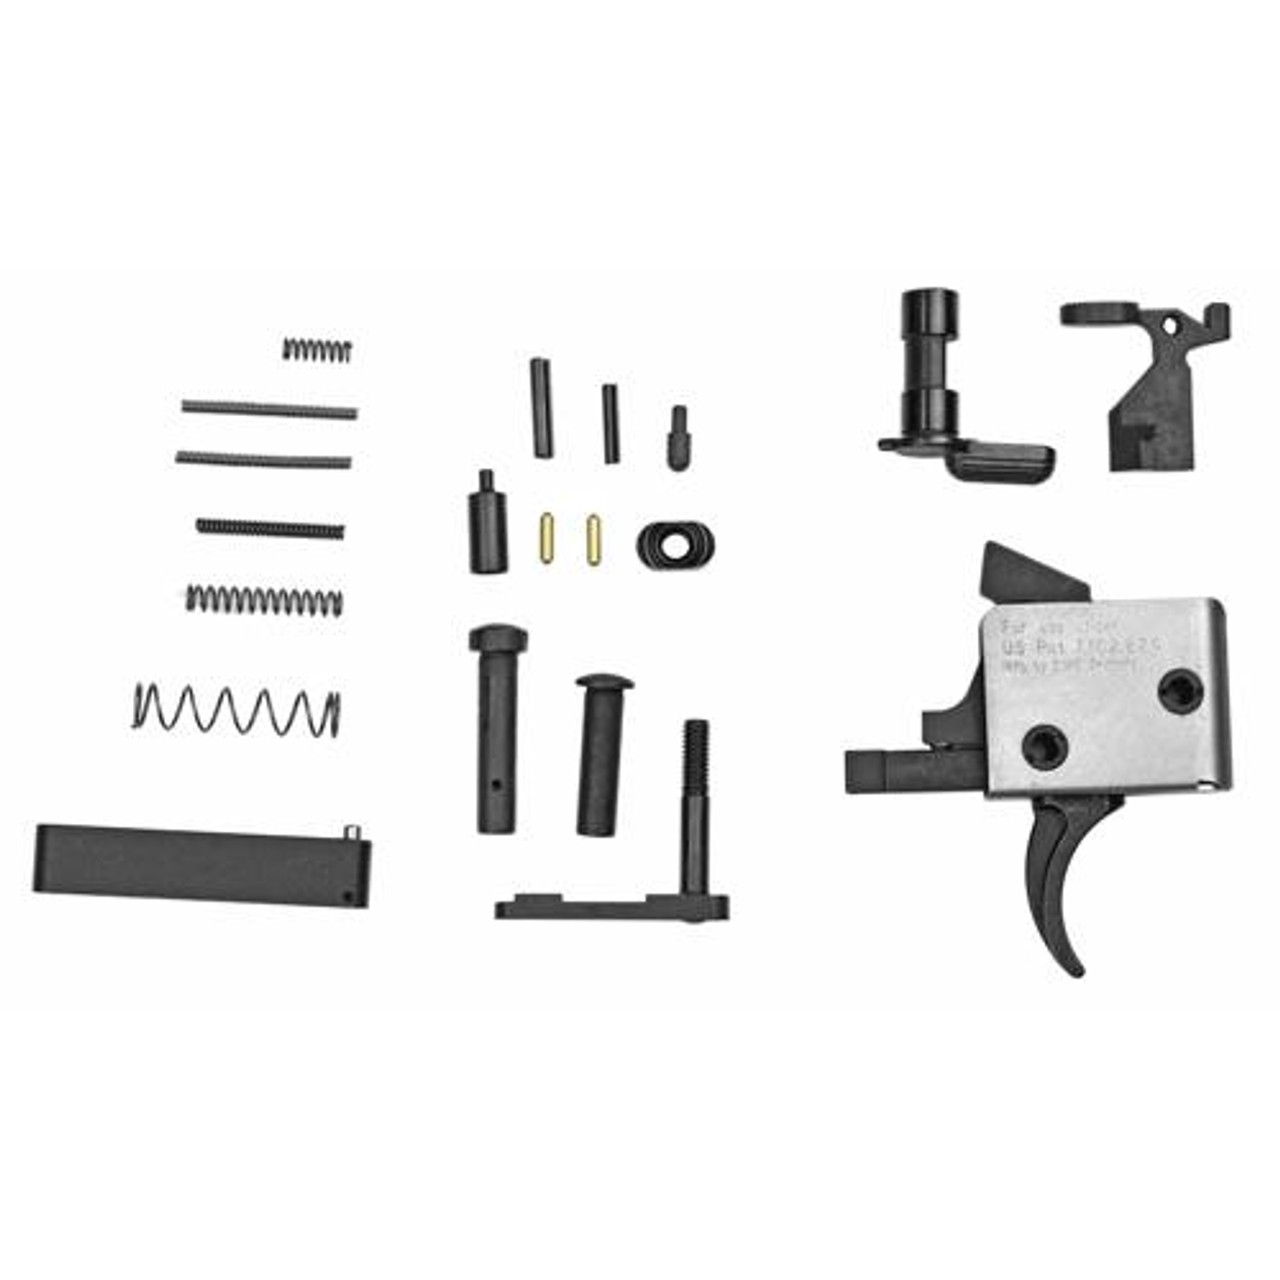 AR 15 Lower Parts Kit: With Drop In Trigger